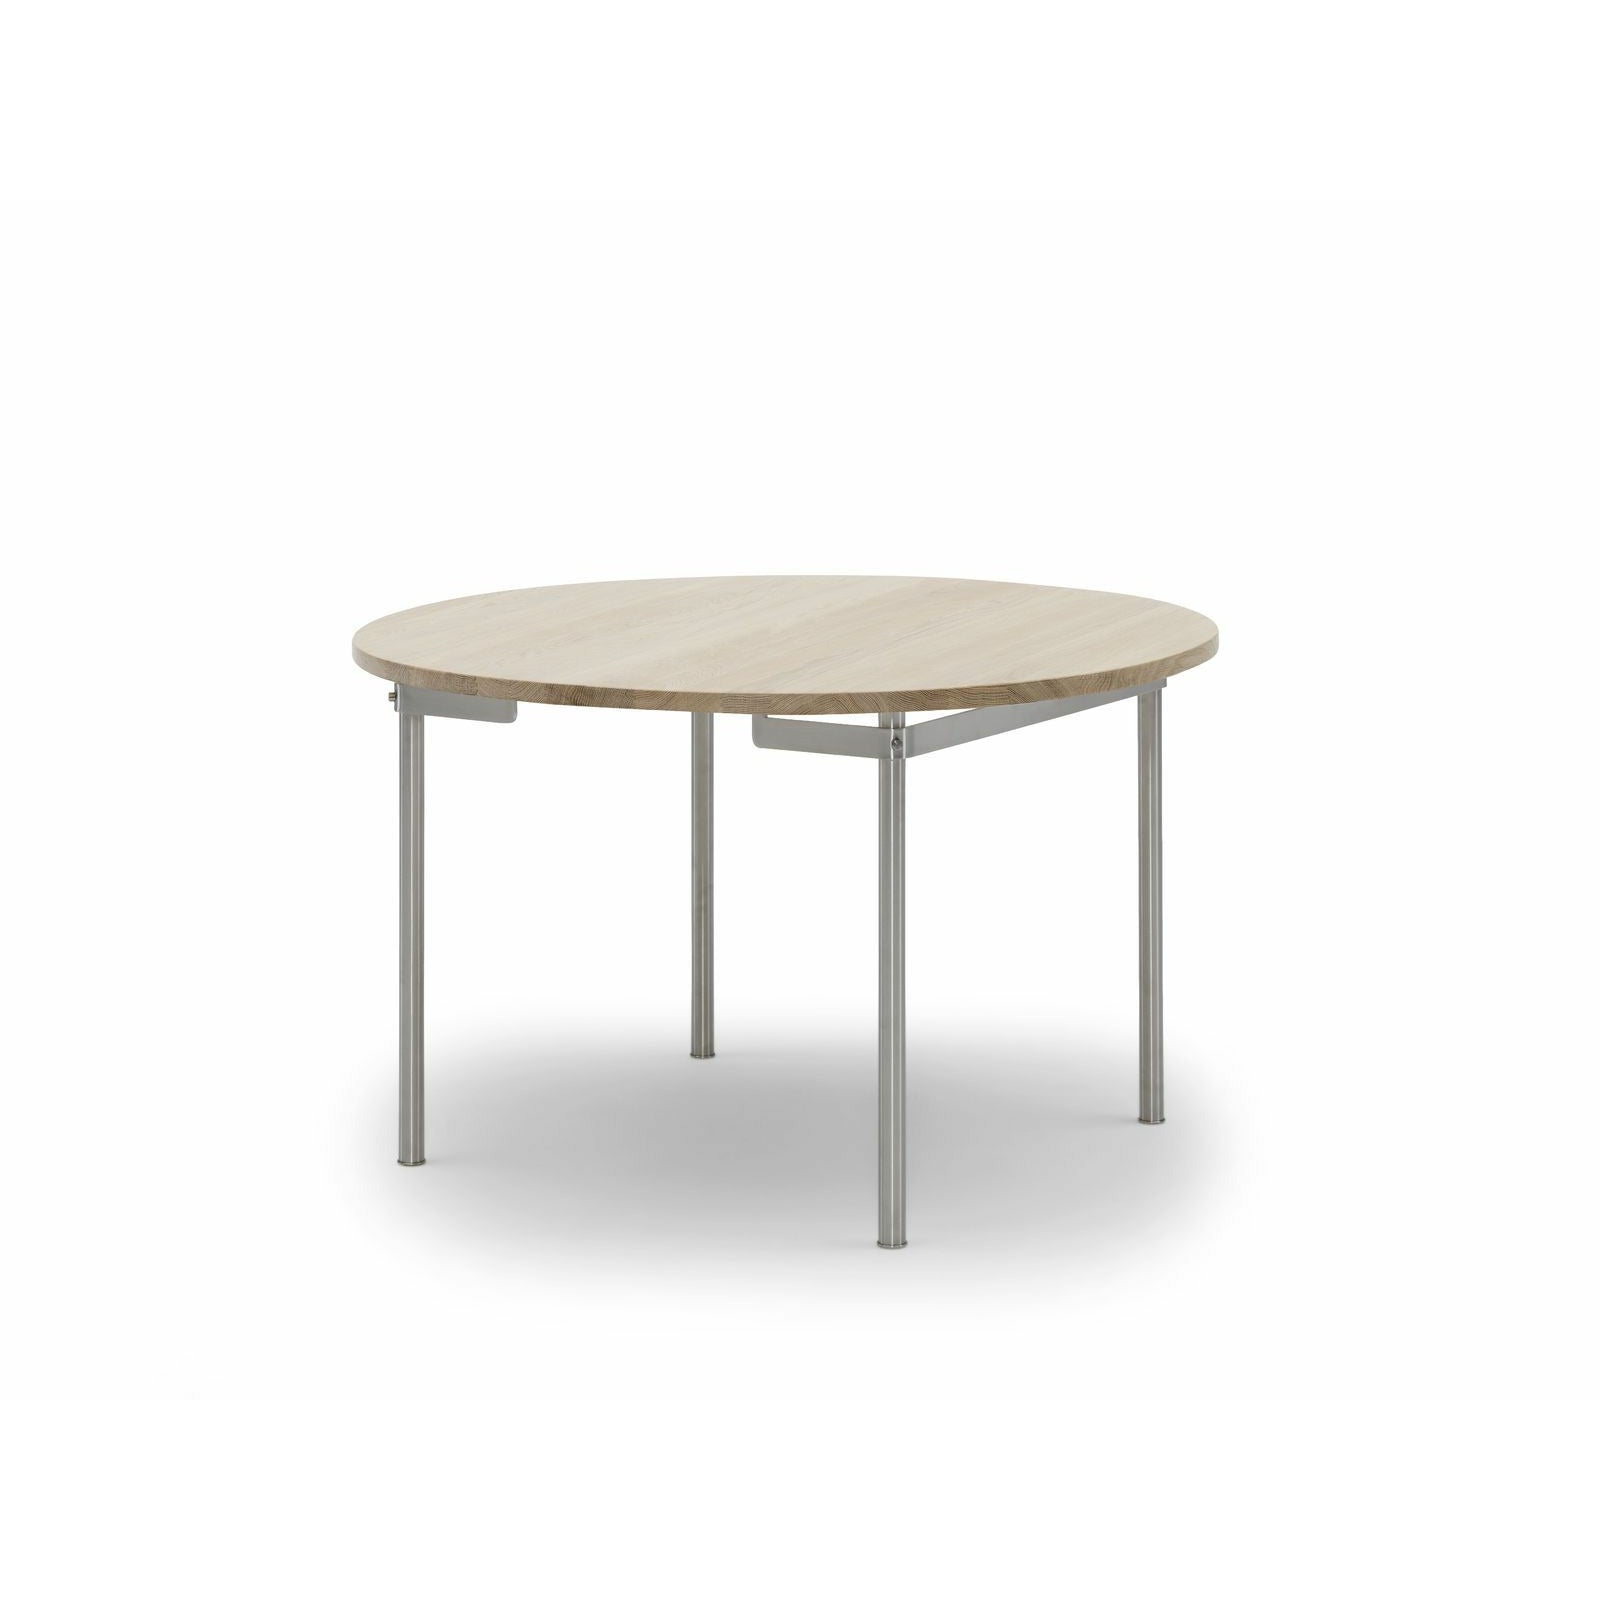 Carl Hansen Ch388 Dining Table Stainless Steel Incl. 2 Additional Plates, White Oiled Oak